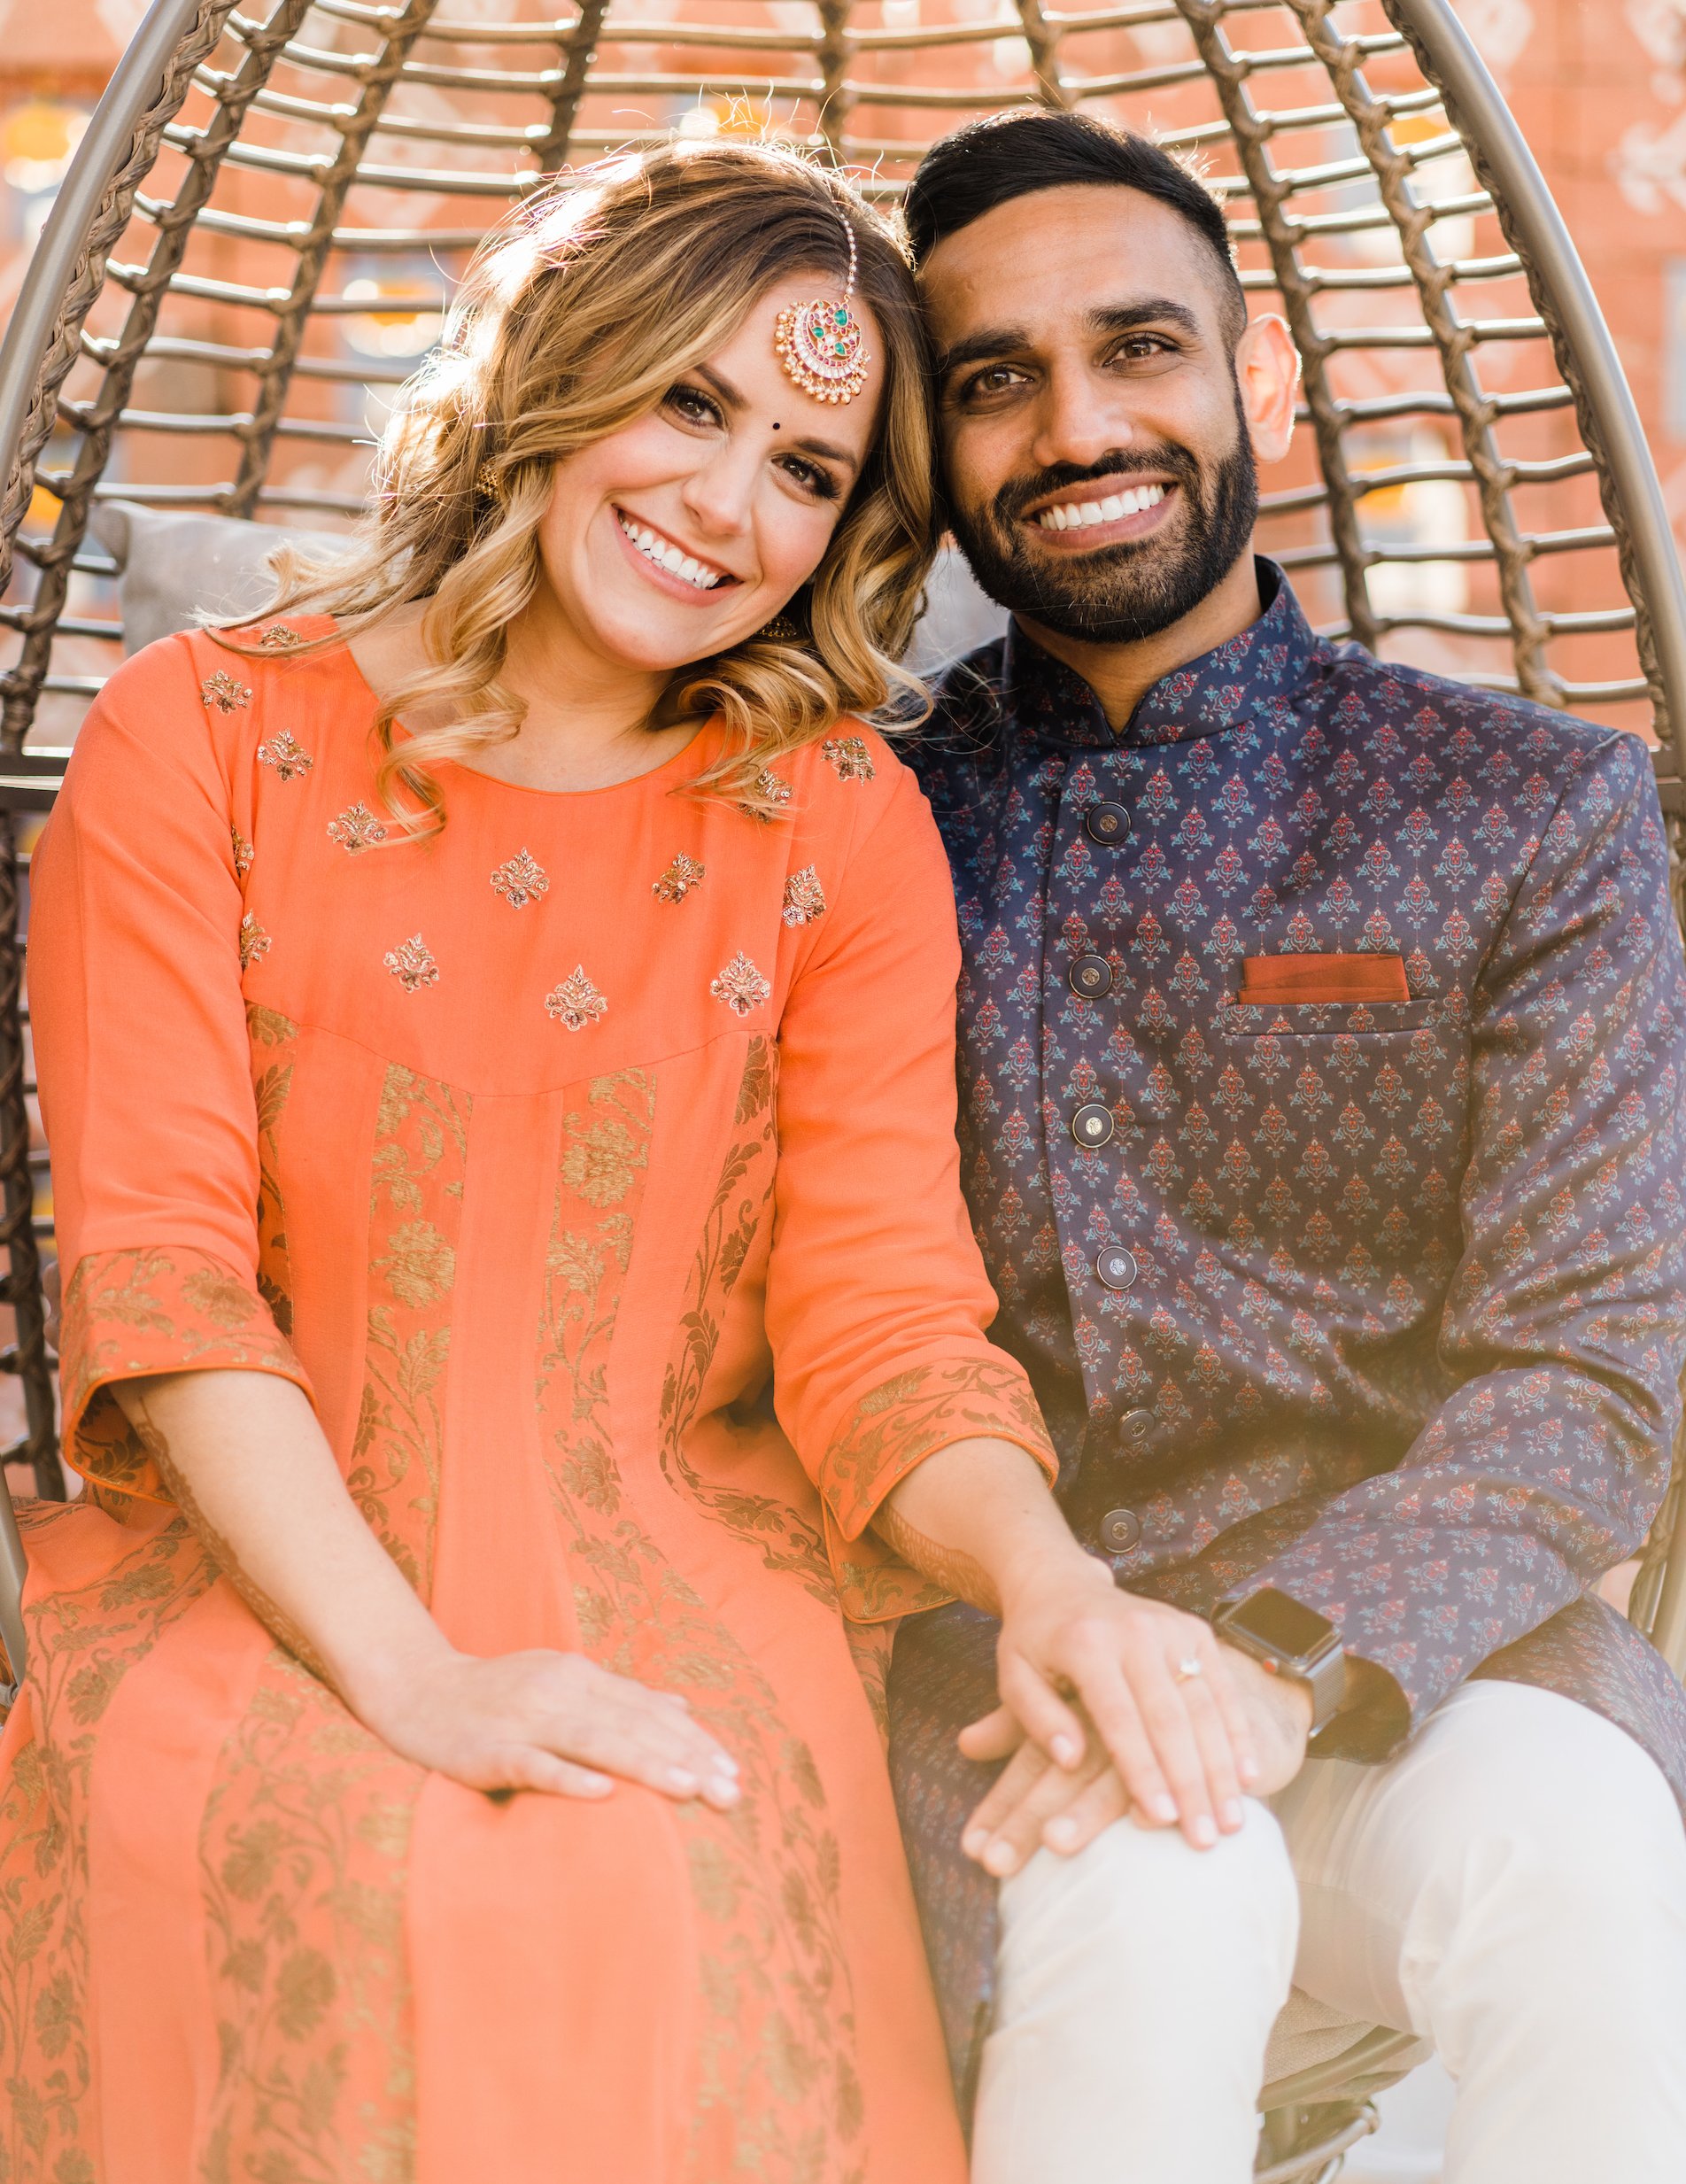 Bride and groom smile wearing traditional Indian wedding attire for their Hindu ceremony. 